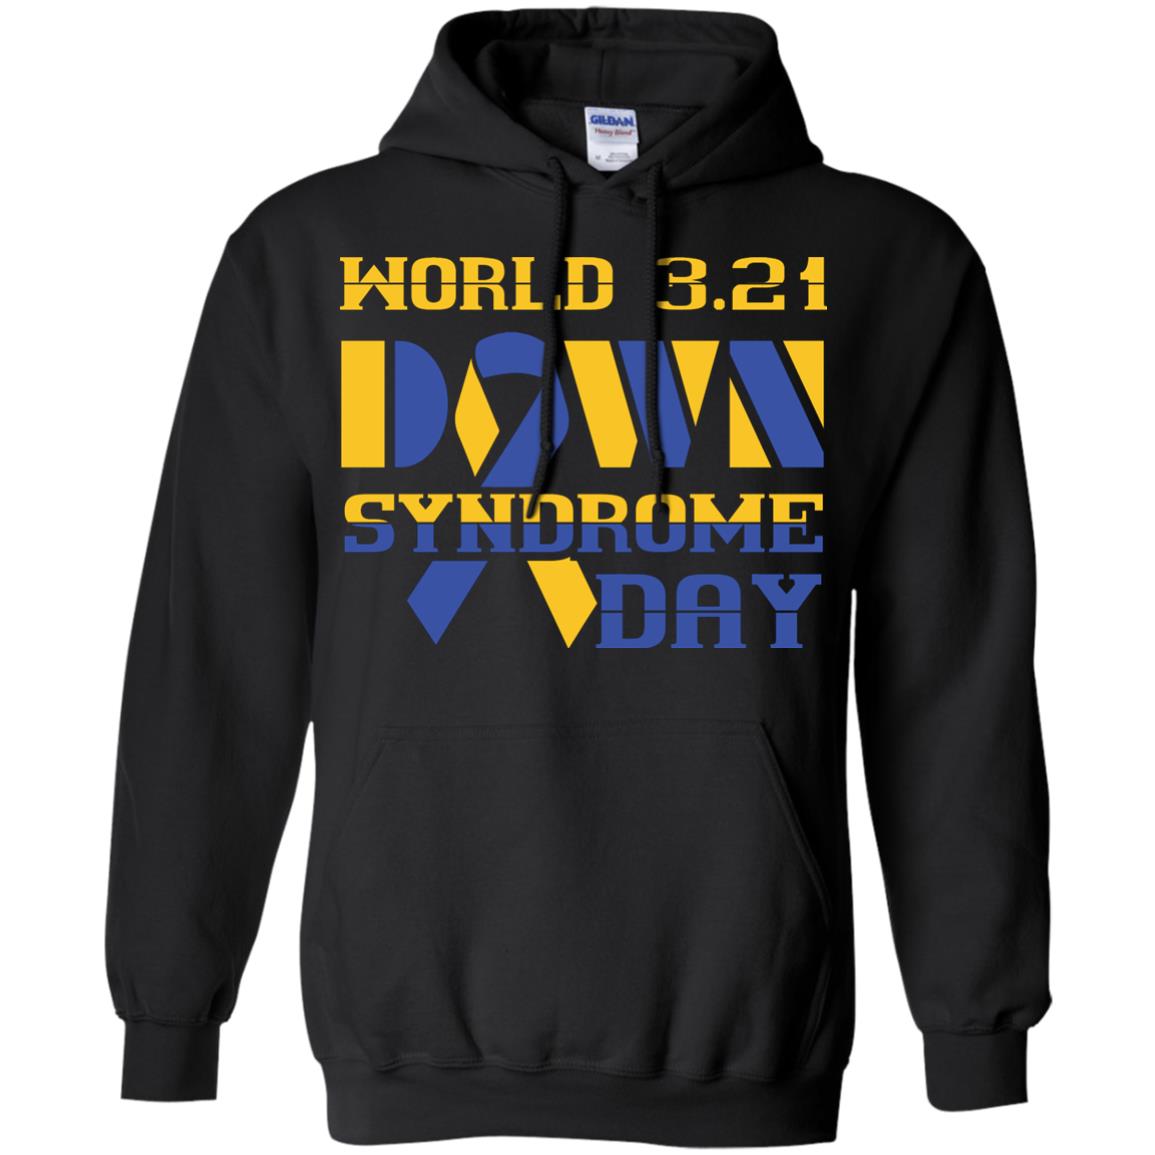 World 3.21 Down Syndrome Day Gift Shirt For Men Or Women